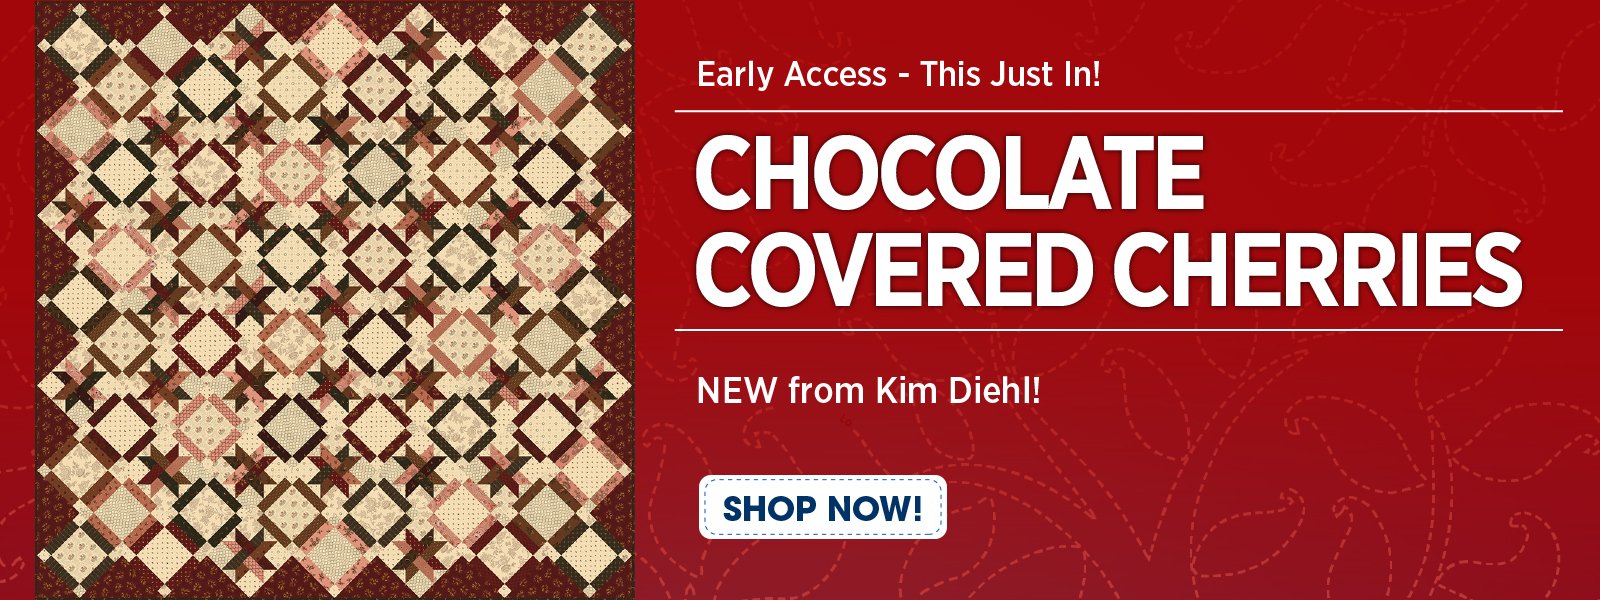 Early Access - This Just In! Chocolate Covered Cherries! NEW from Kim Diehl!